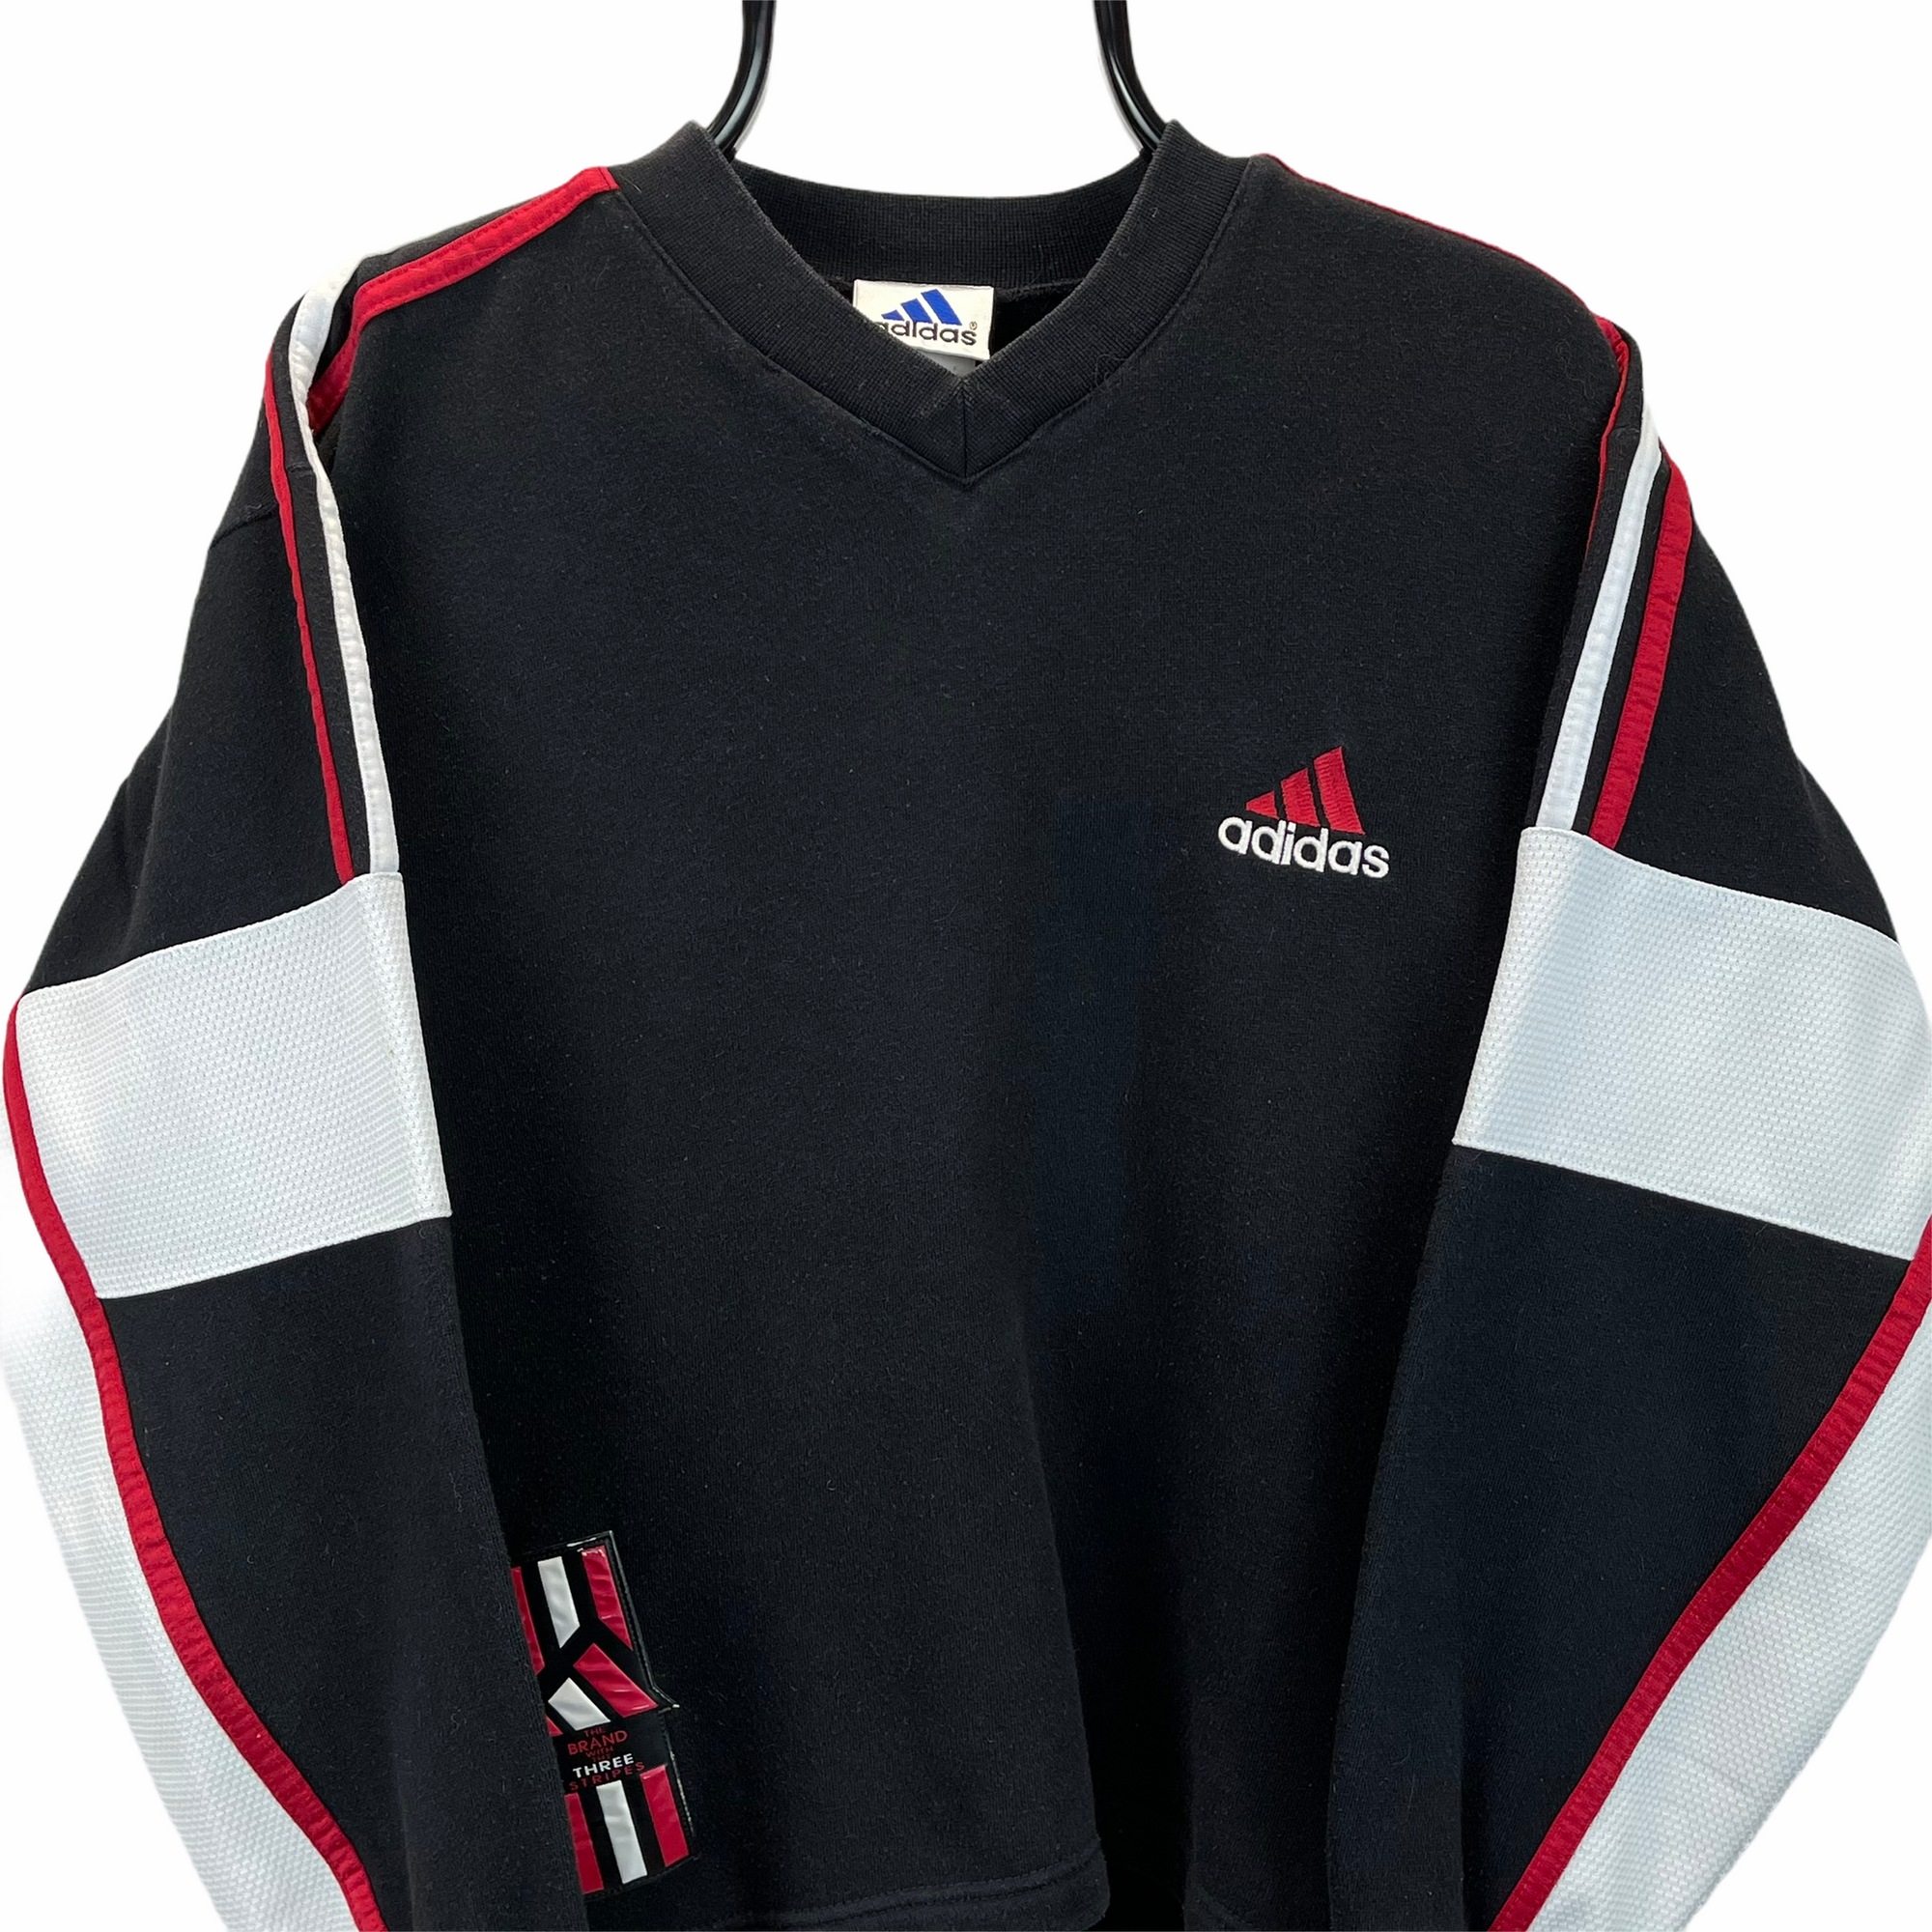 Vintage 90s Adidas Embroidered Small Logo Sweatshirt in Black, Red & White - Men's Small/Women's Medium